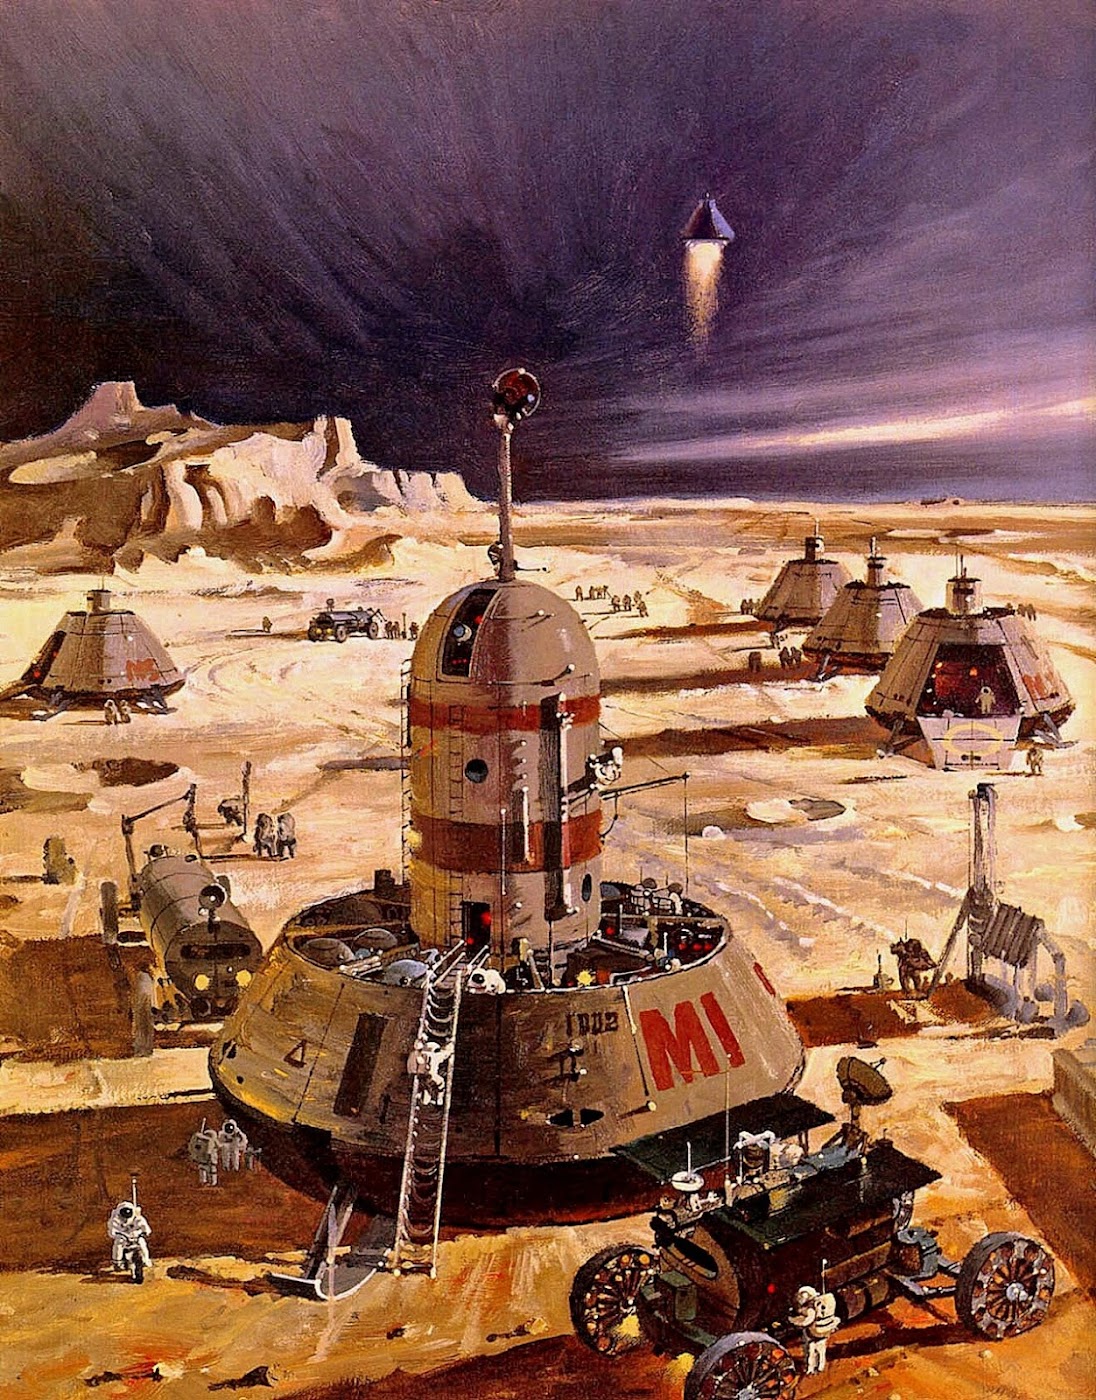 Mars outpost (1986) by Robert McCall